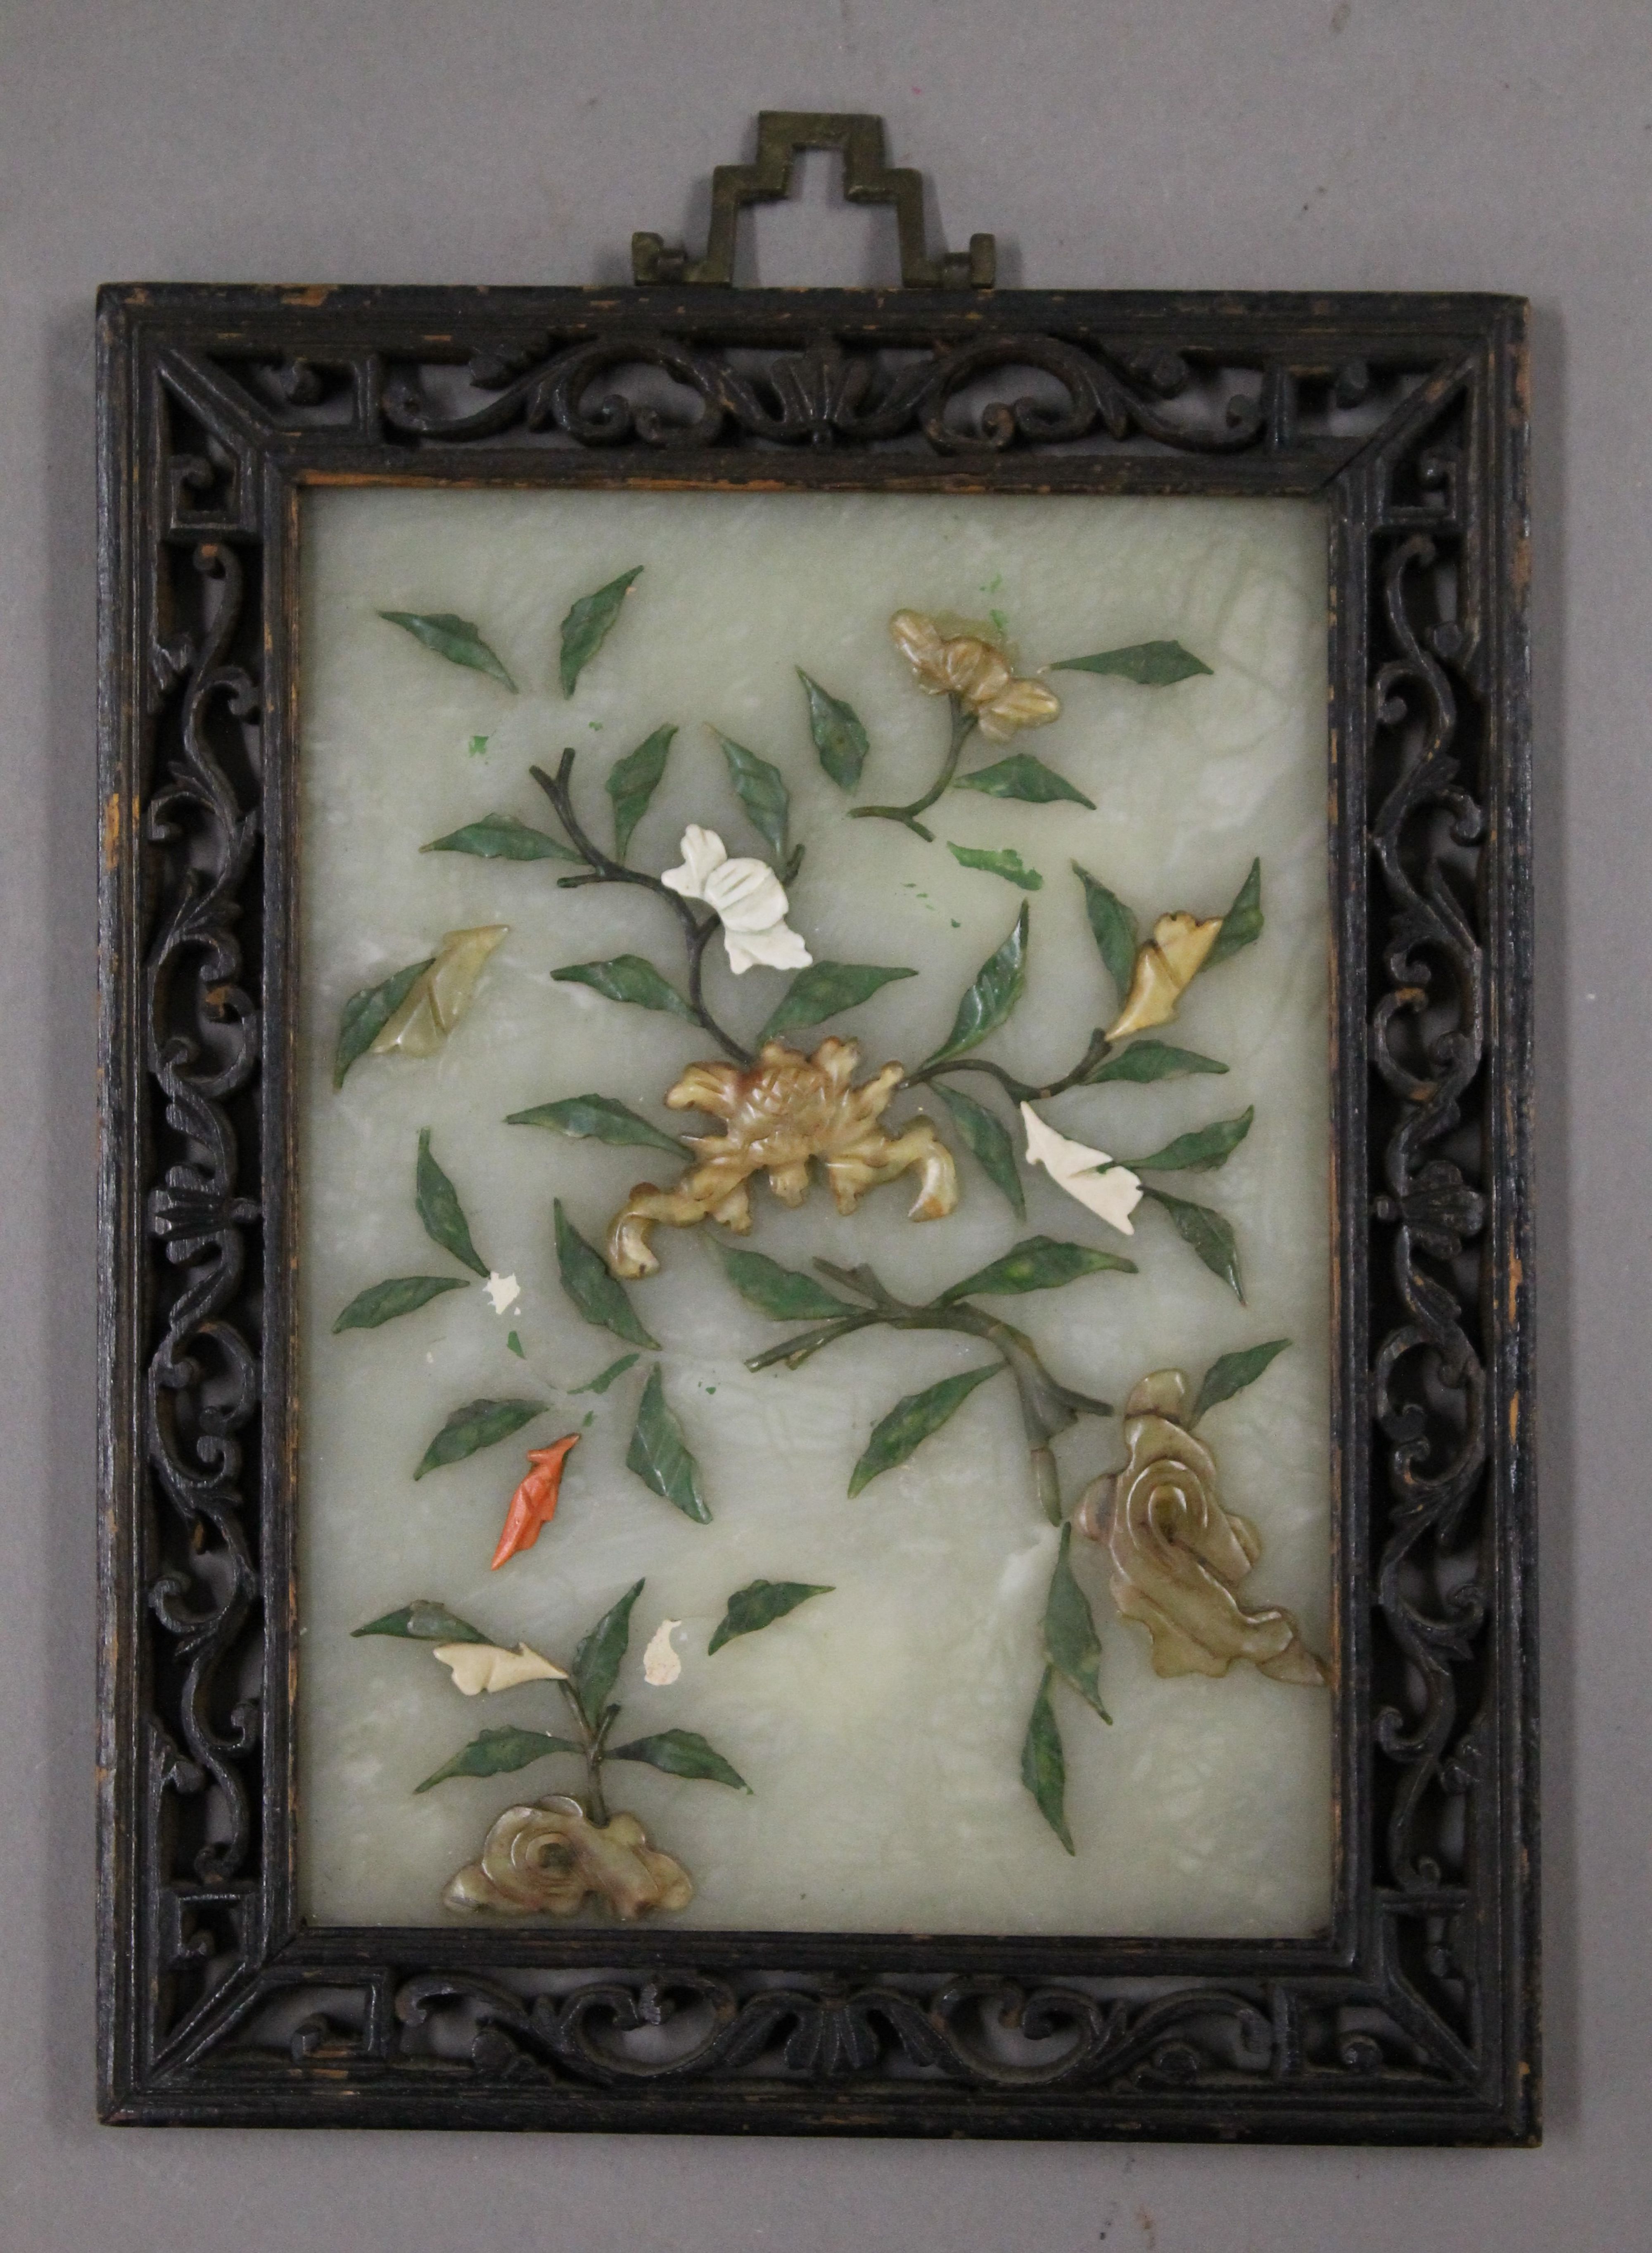 A Chinese hardstone mounted jade plaque in a carved wooden frame. 15 x 19 cm overall.